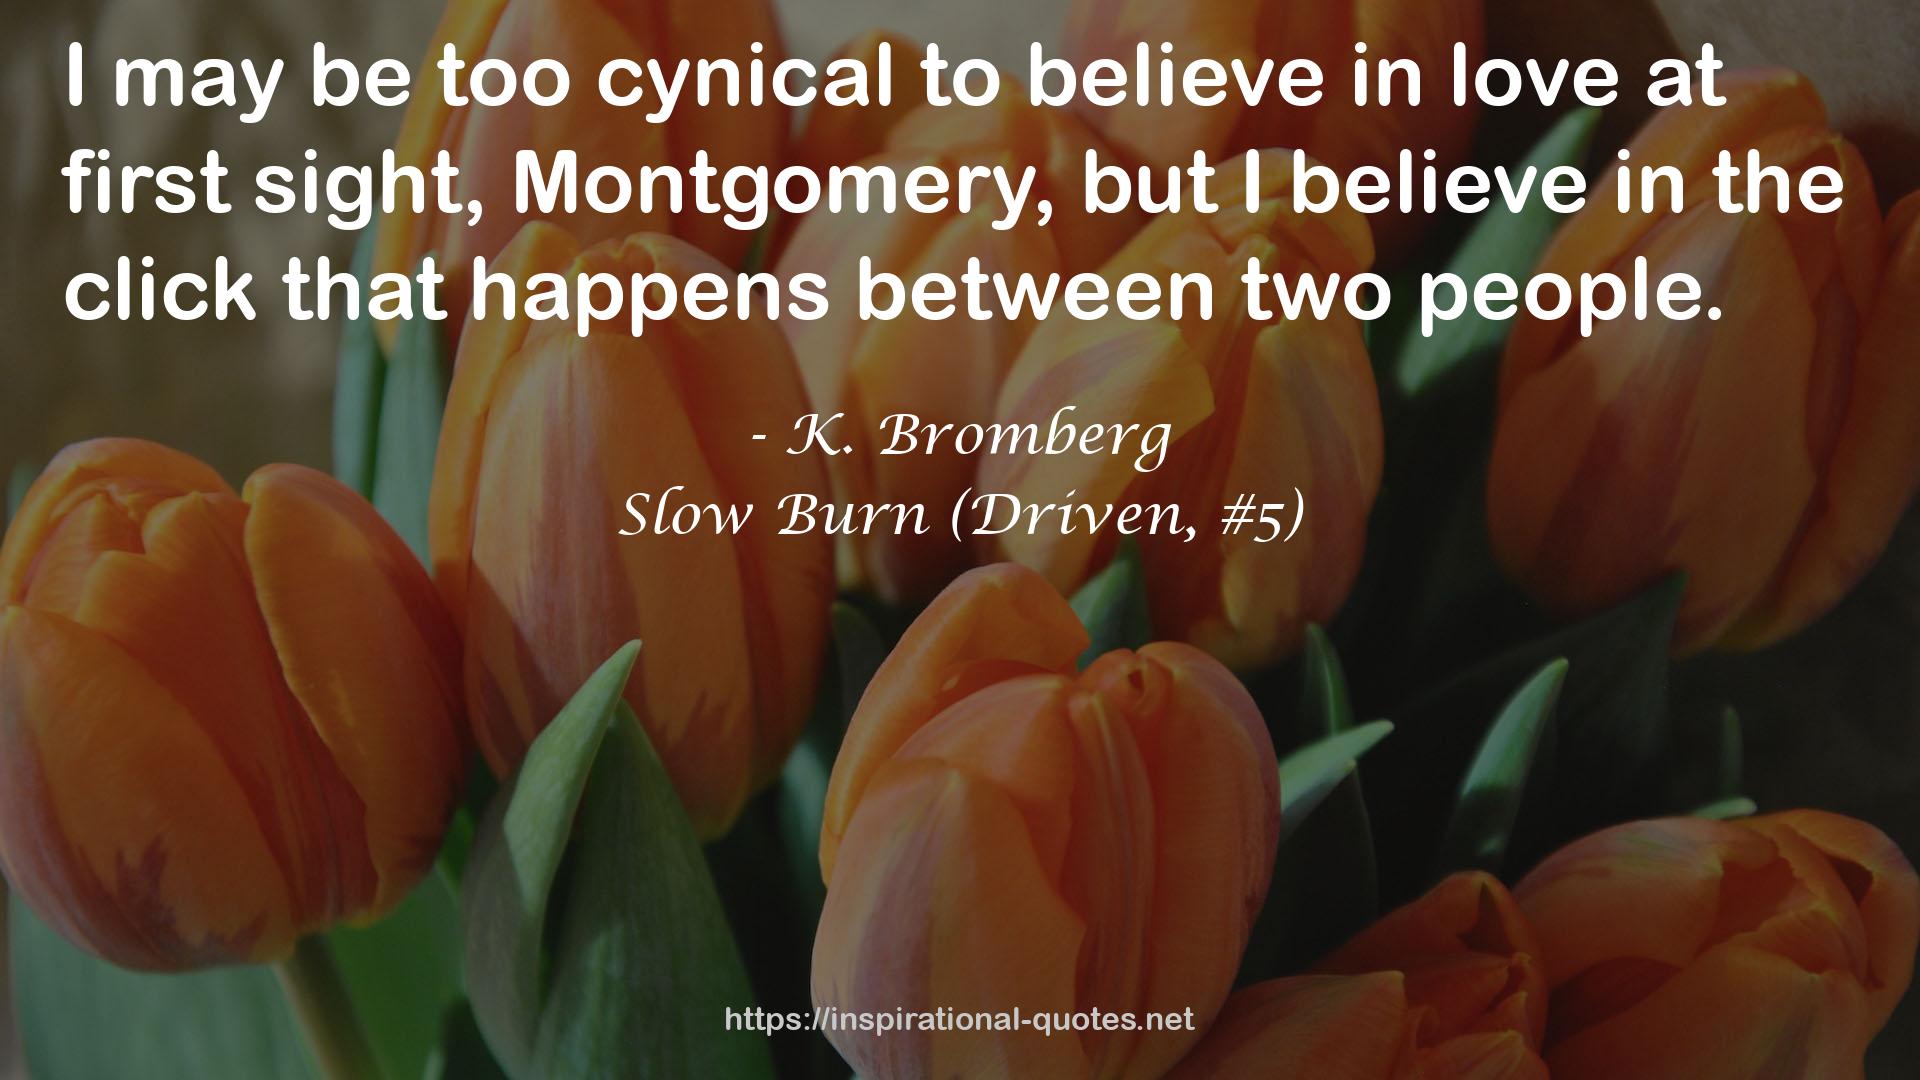 Slow Burn (Driven, #5) QUOTES